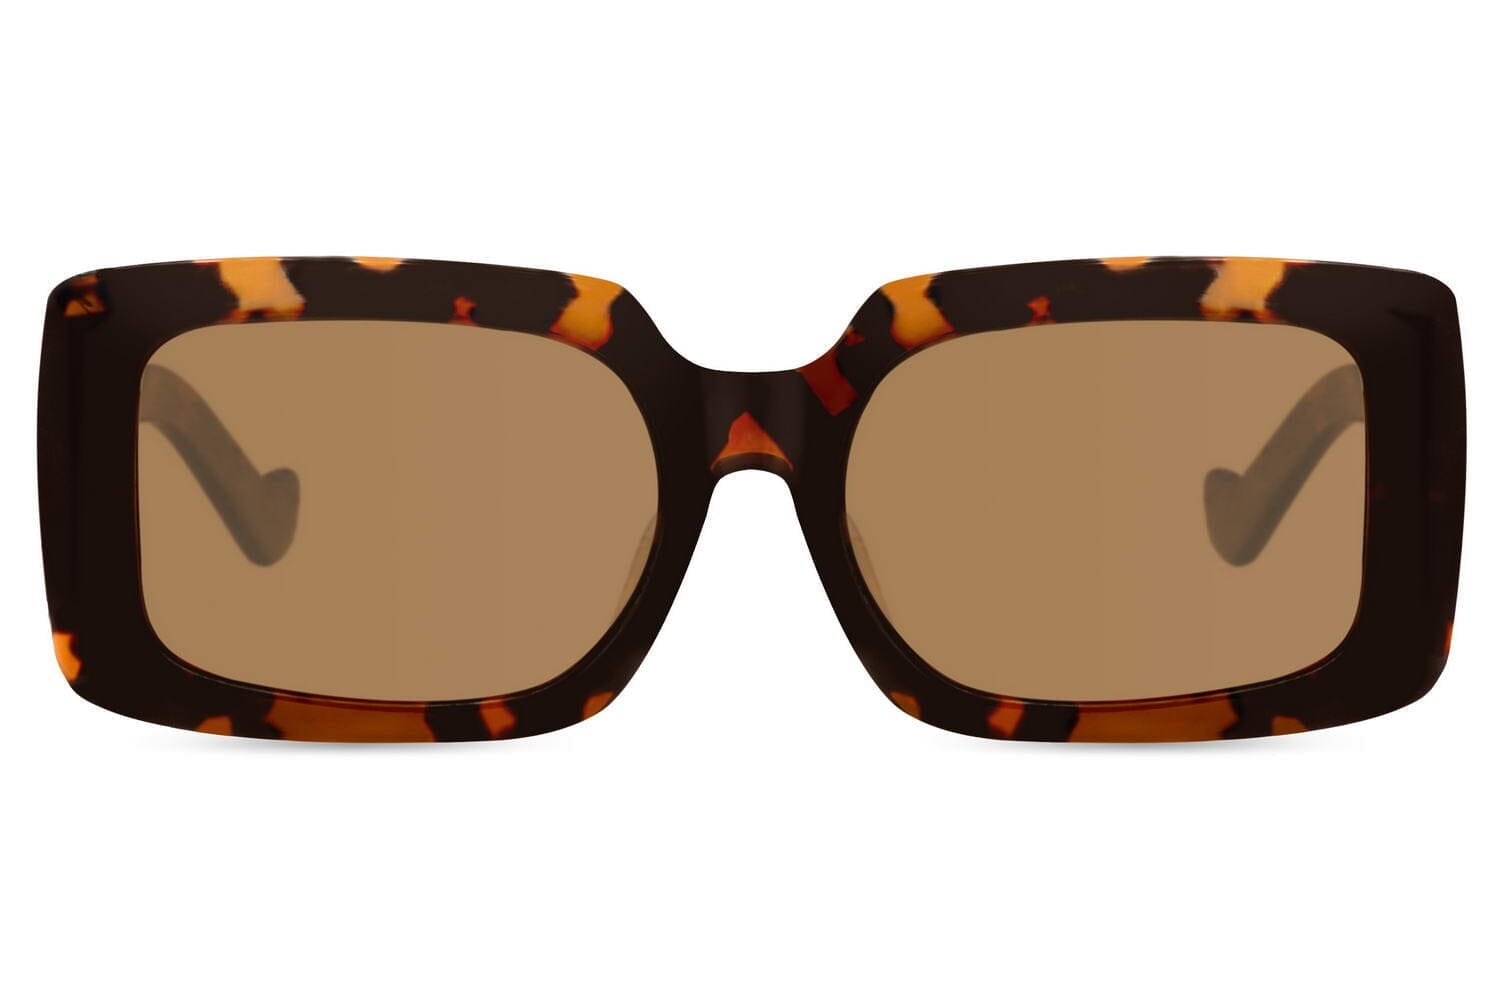 Brown rectangle sunglasses. UV400 protected.